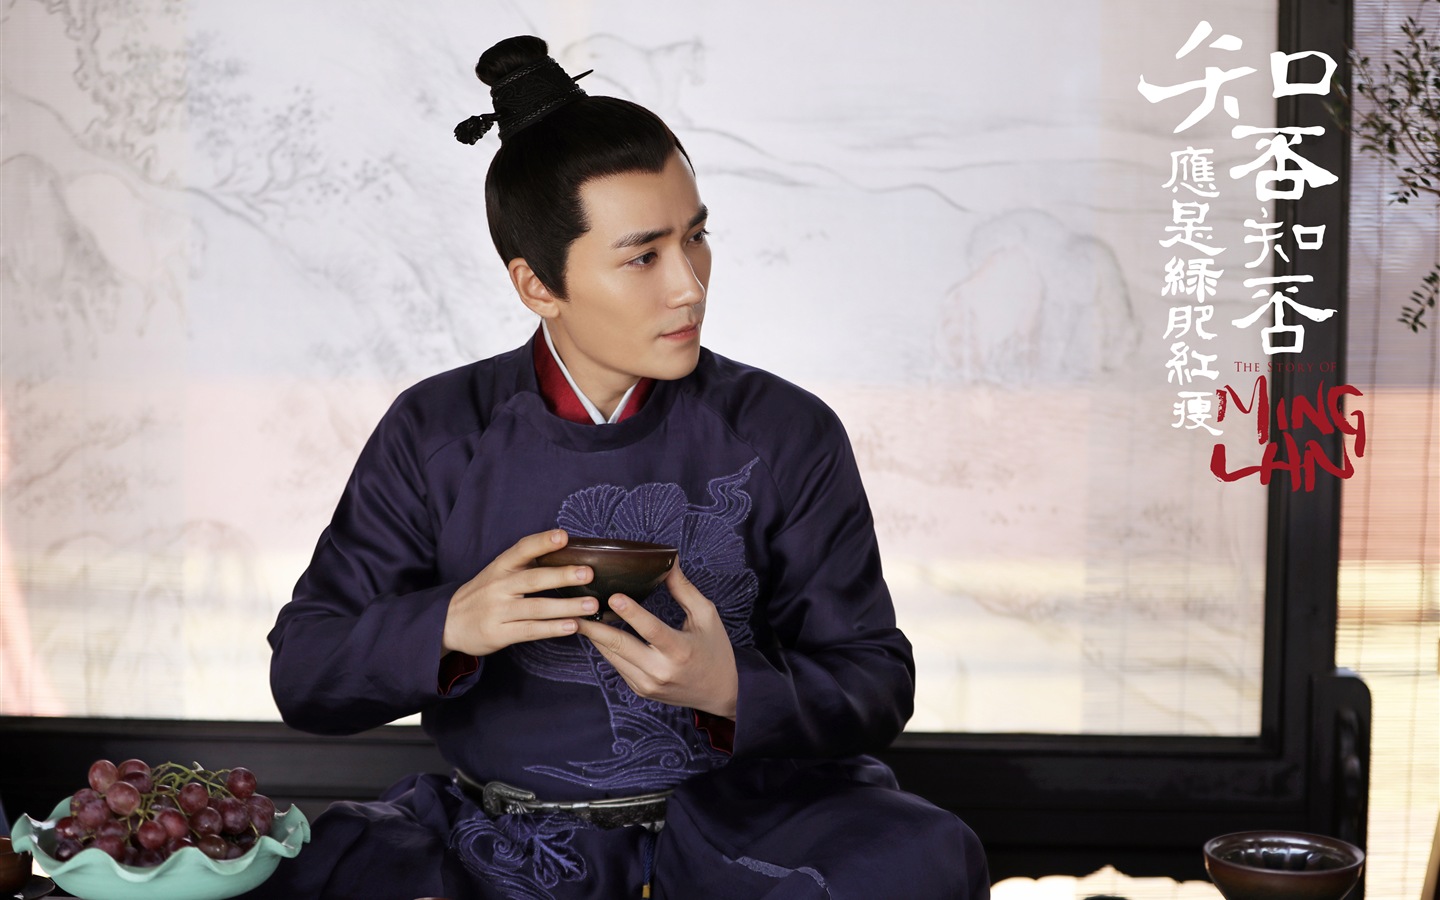 The Story Of MingLan, TV series HD wallpapers #10 - 1440x900